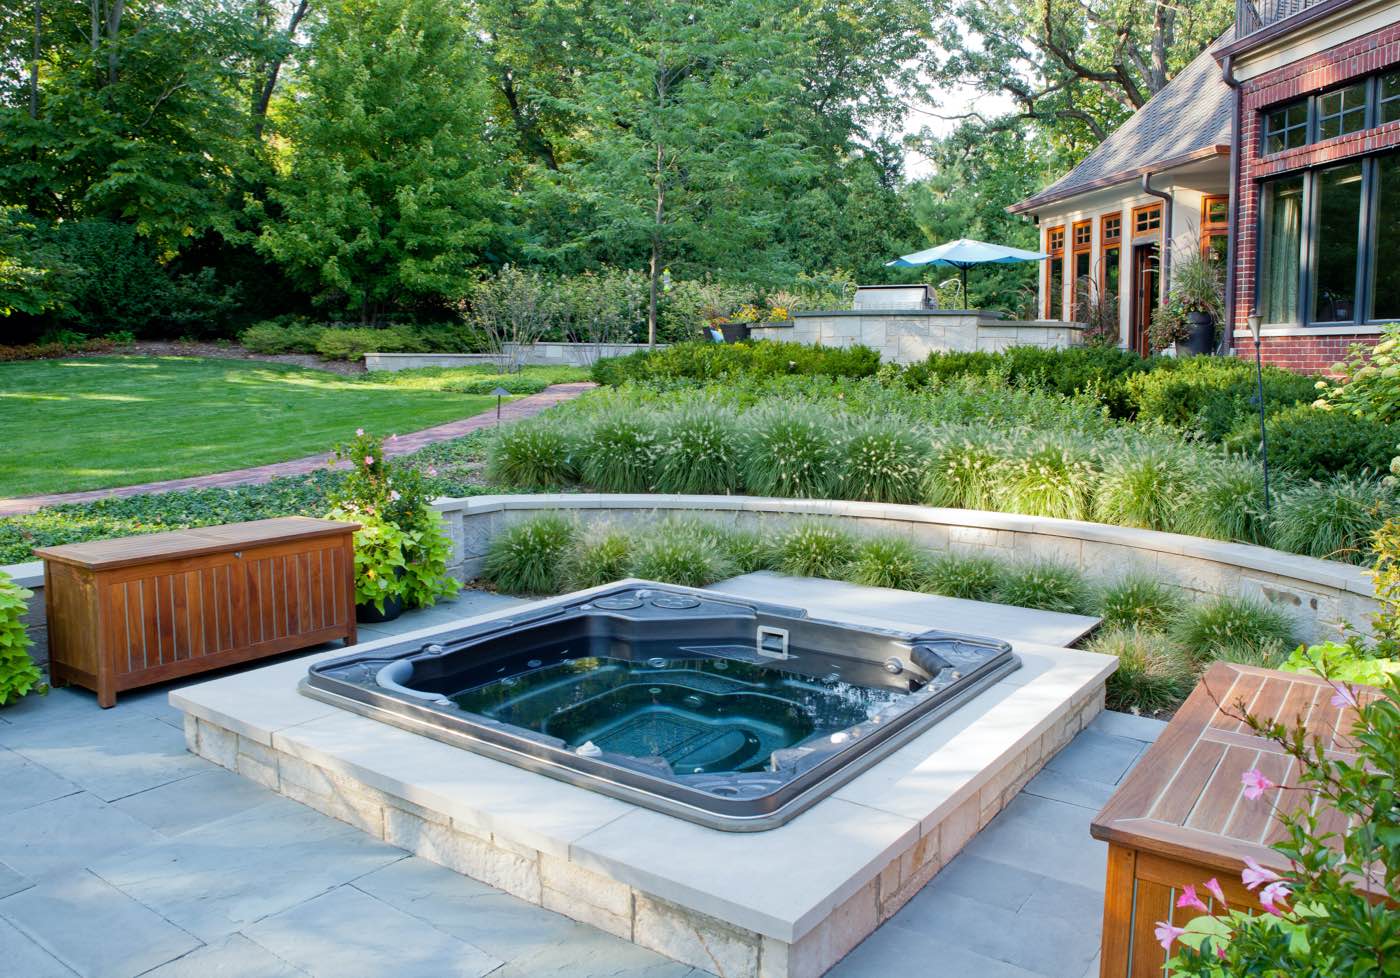 Outdoor hot tub feature